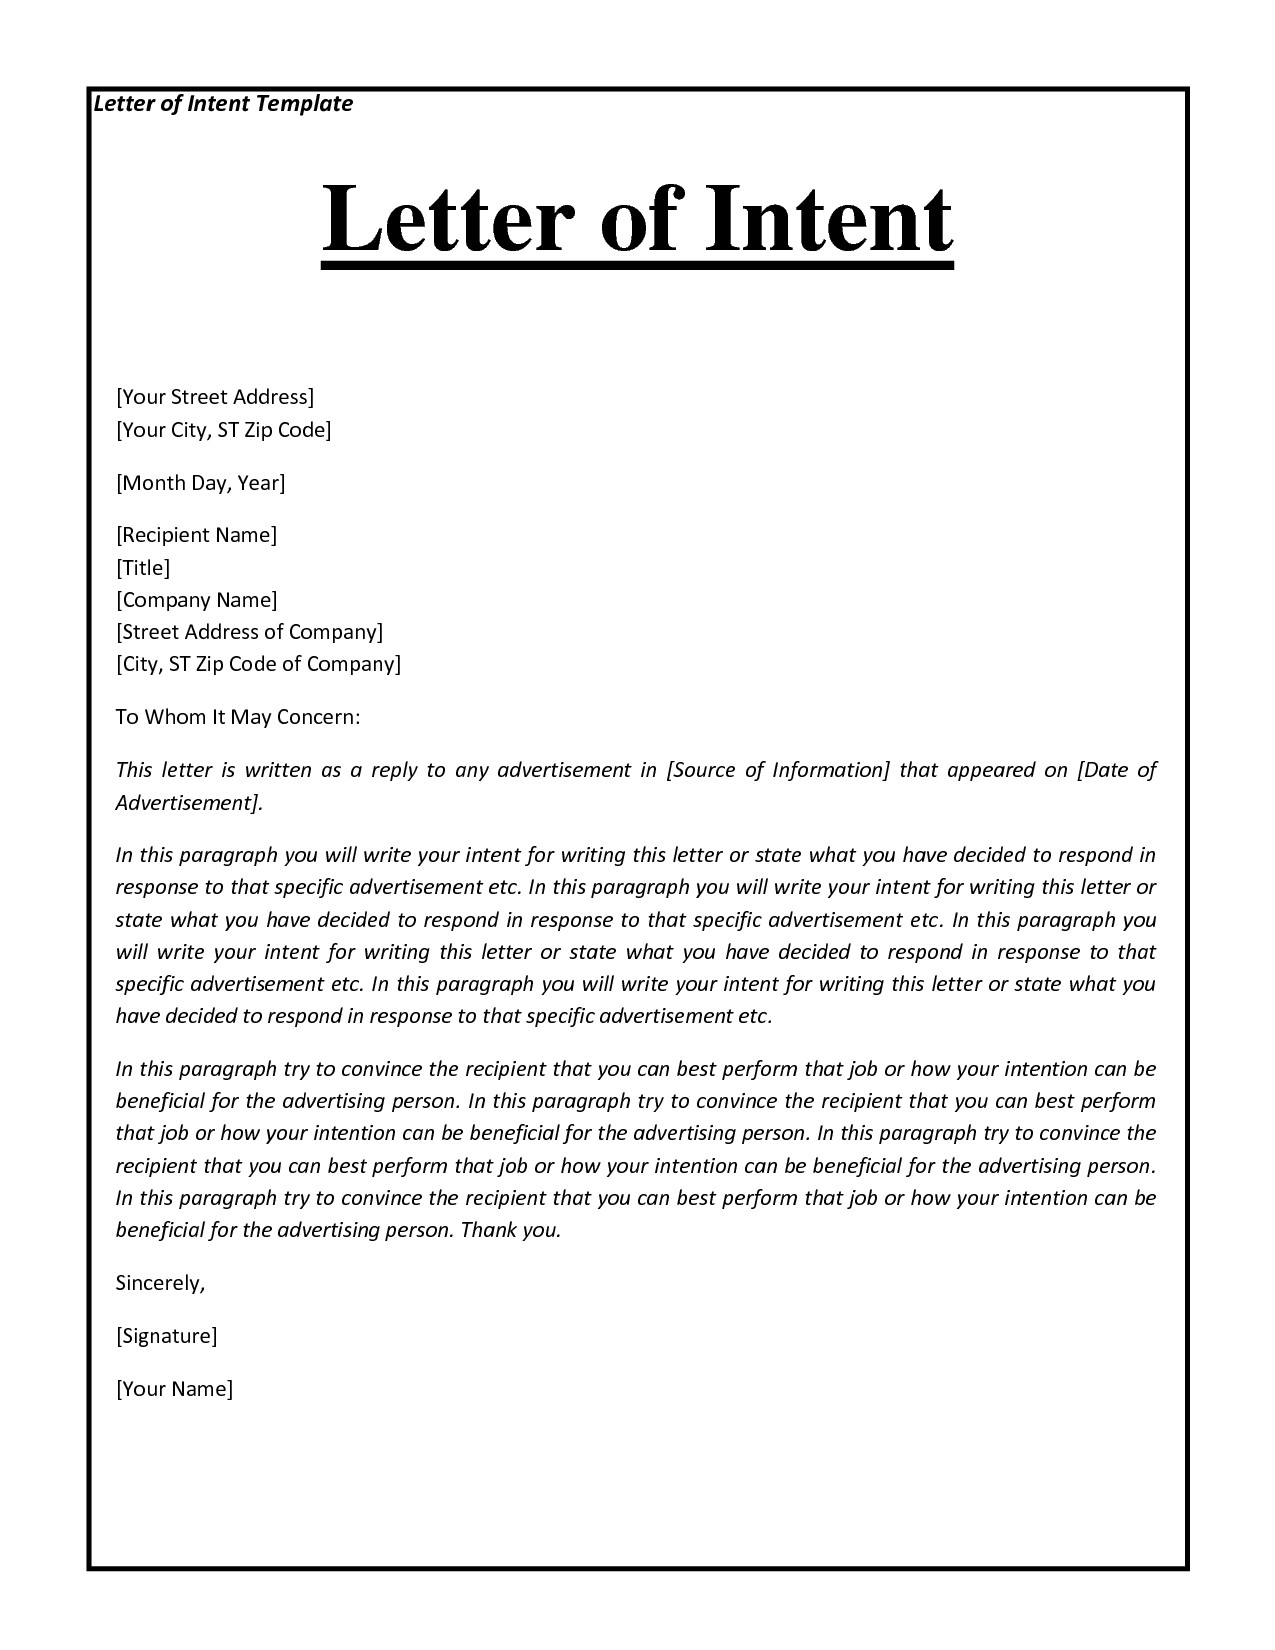 Template Letter Of Intent Letter Of Intent for Job Application Template – Prahu